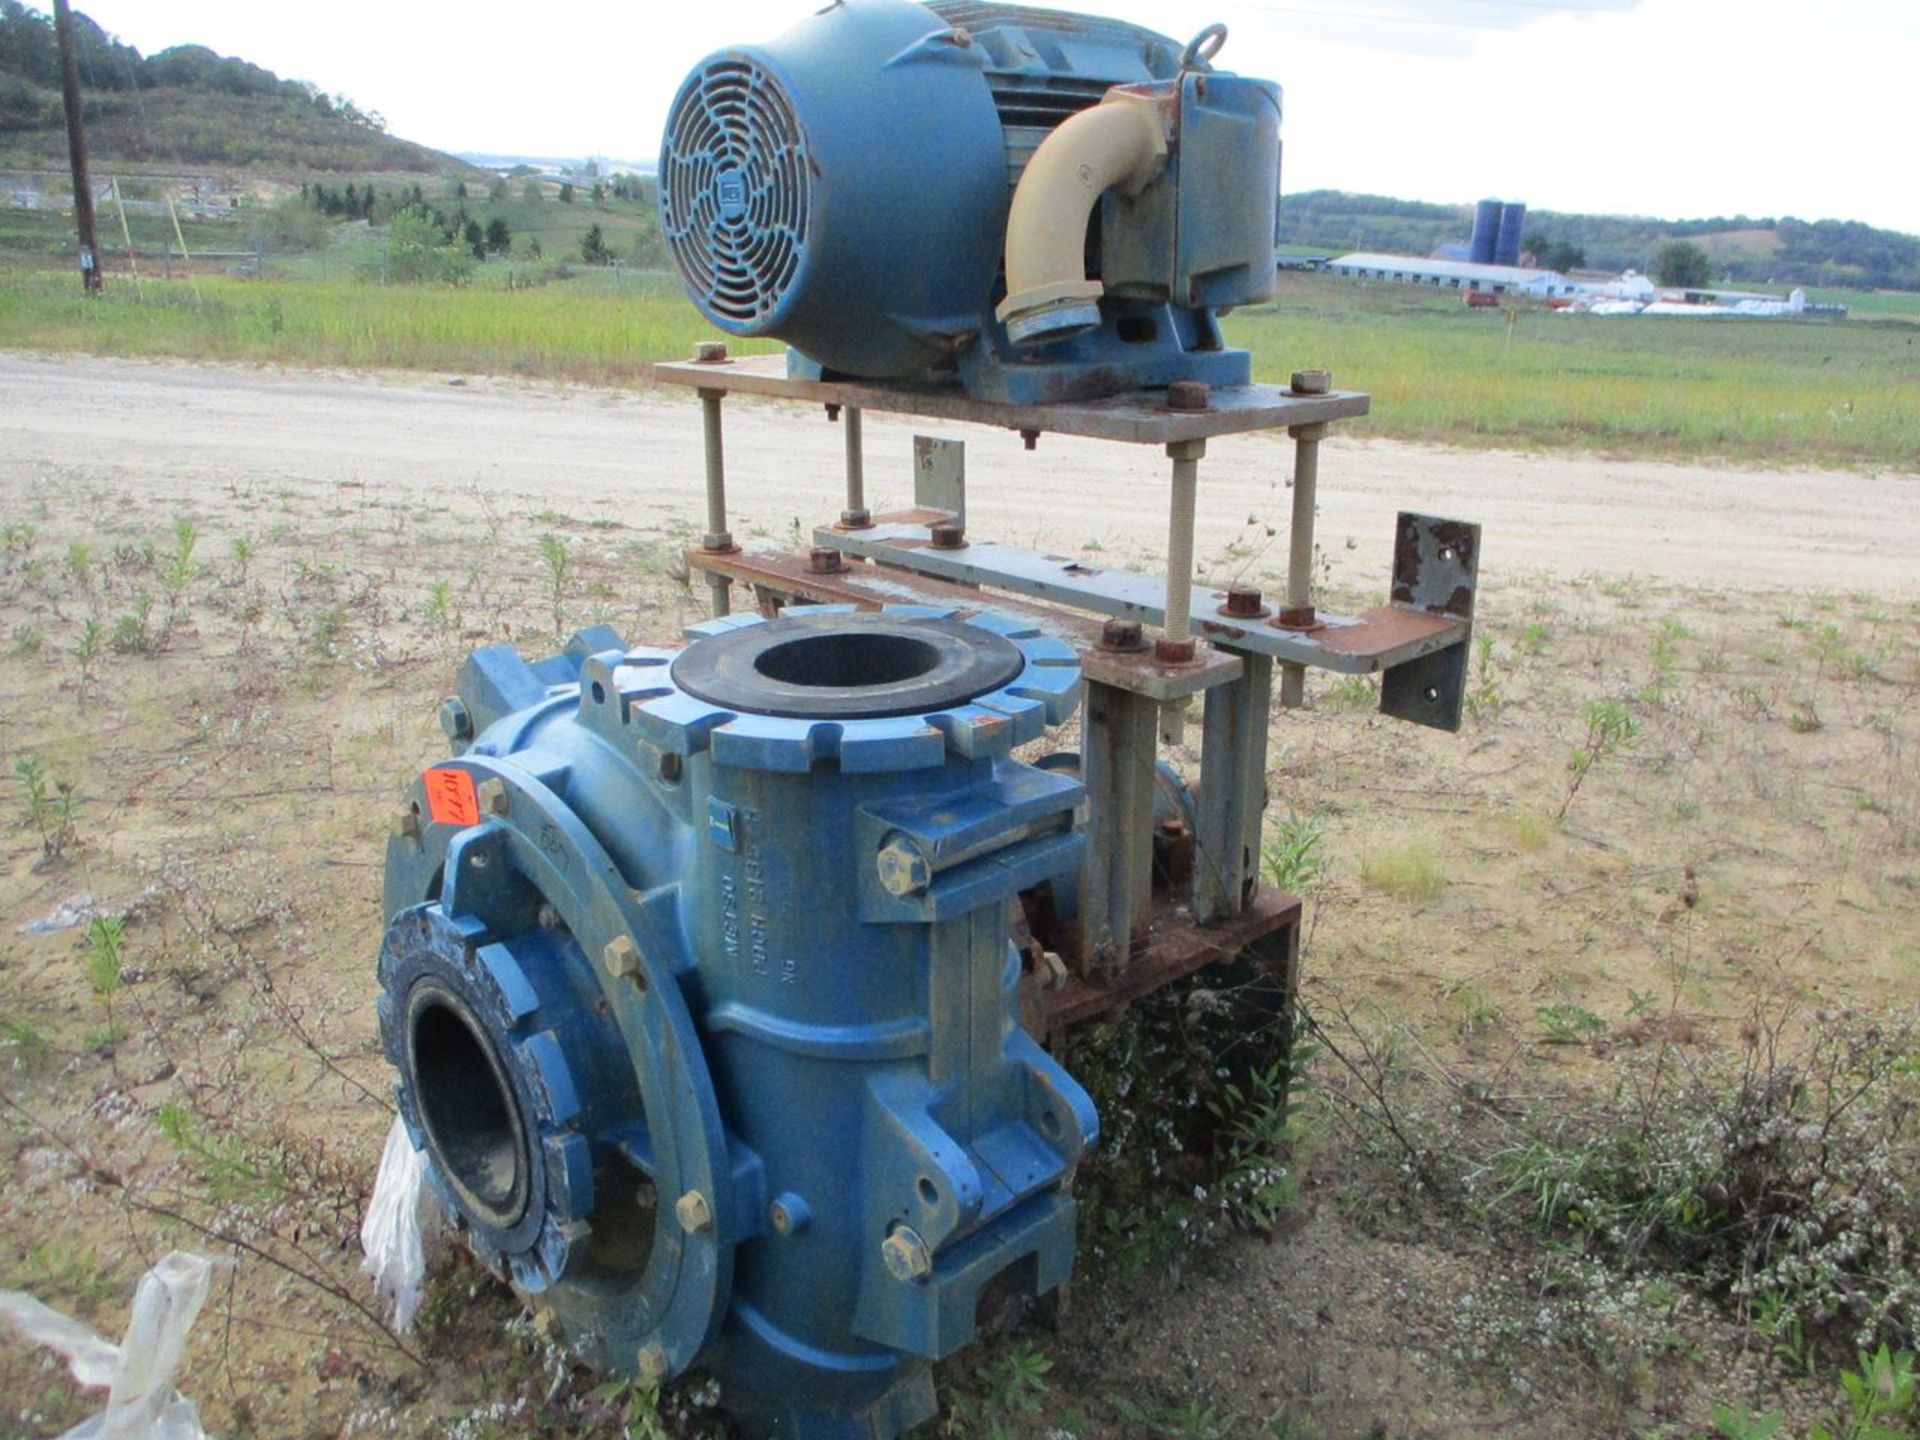 Metso Model HR250, 100 HP Horizontal Slurry Pump, Rubber Lined, 10" Inlet, 8" Outlet (Sold - Subject